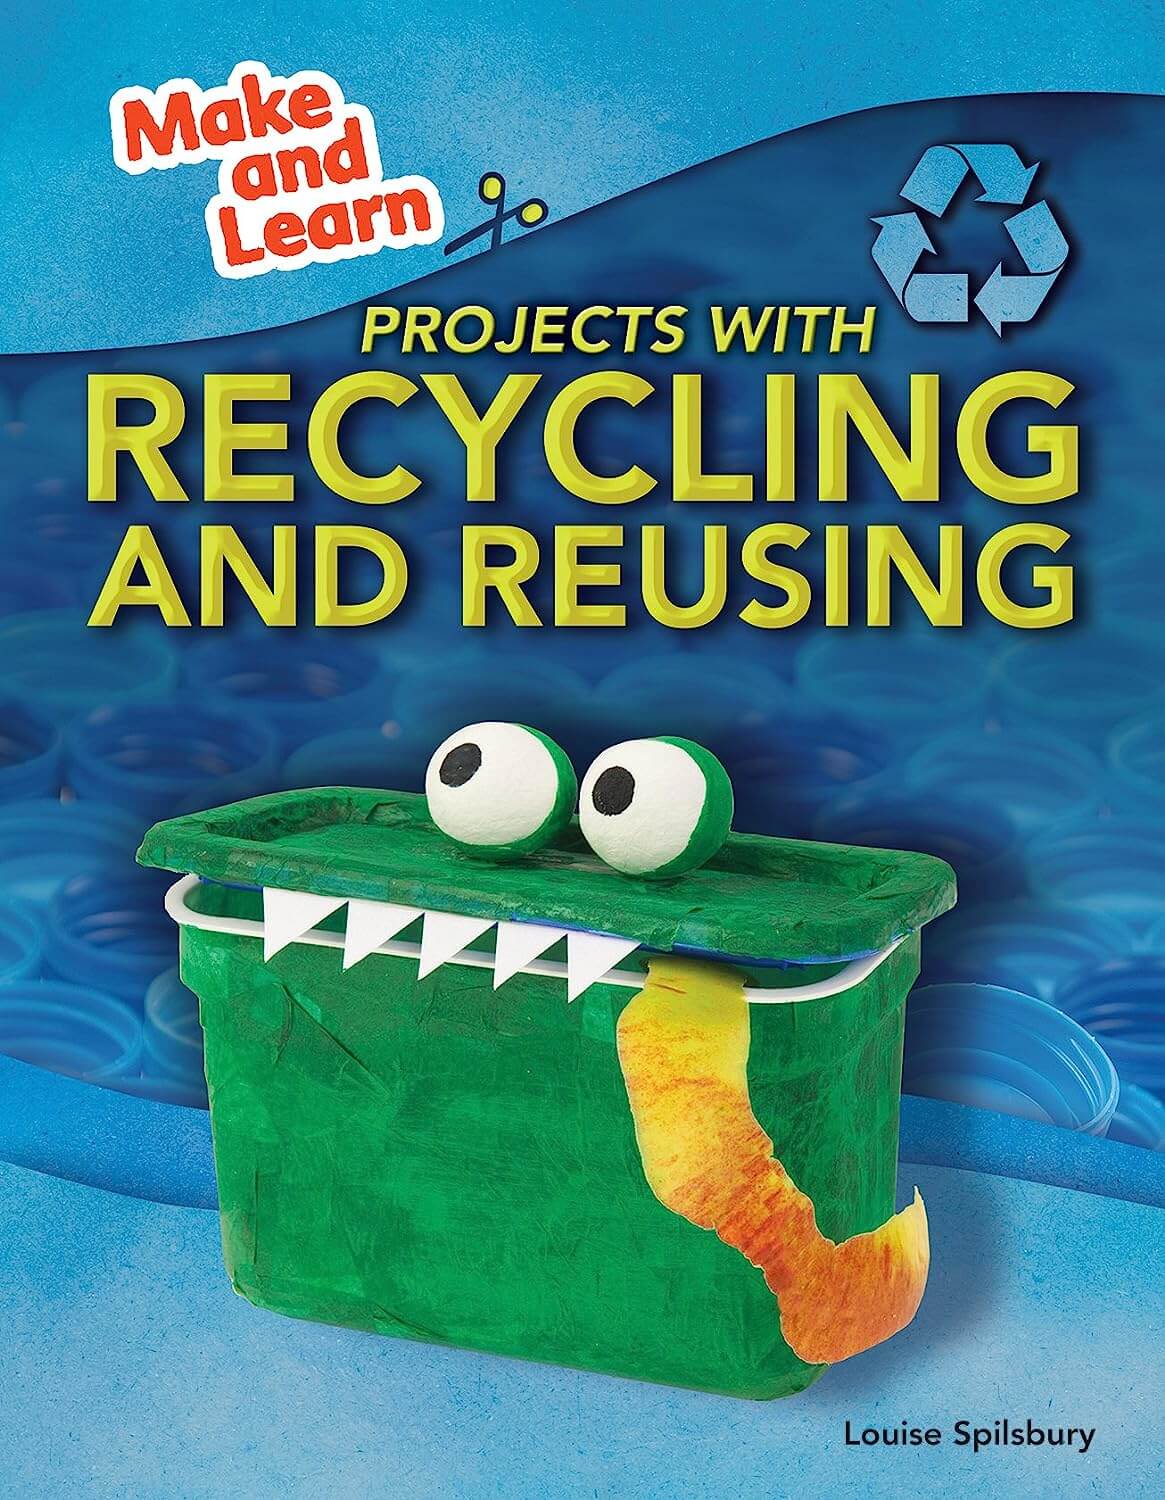 Make and learn projects with recycling and reusing  by Louise Spilsbury